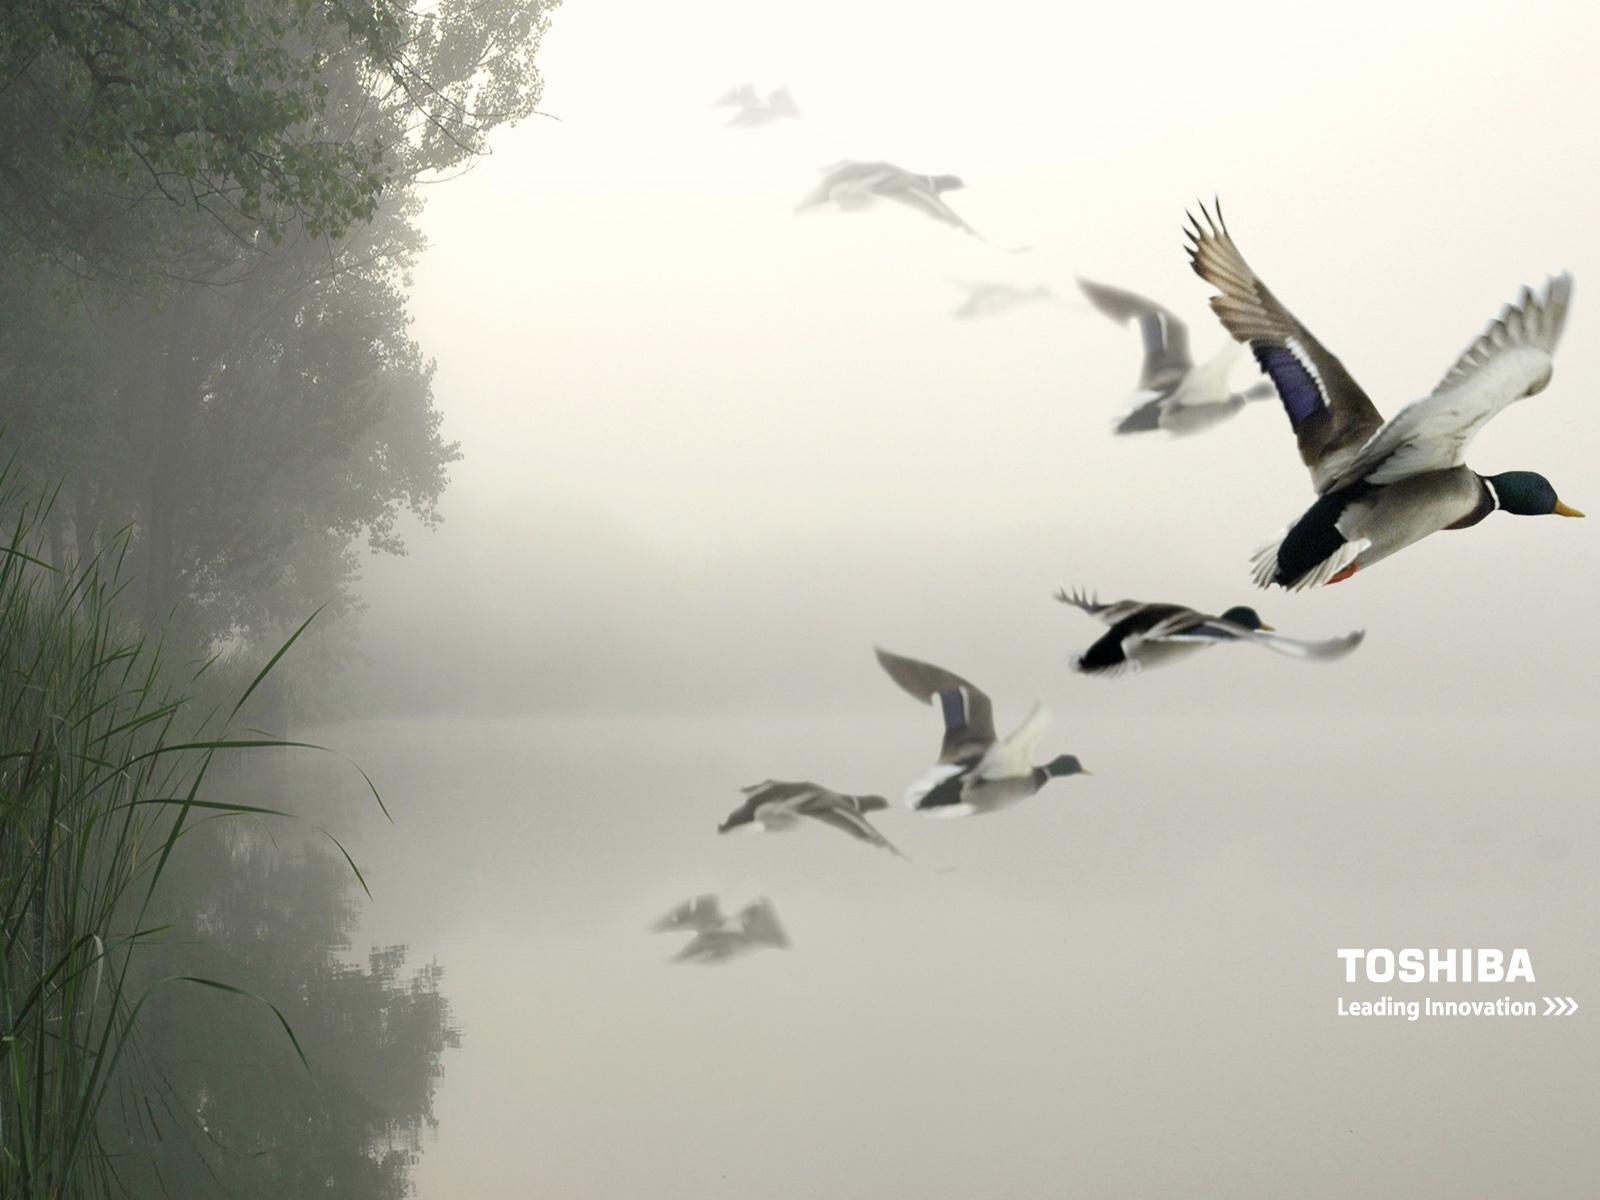 Toshiba birds in the air for 1600 x 1200 resolution